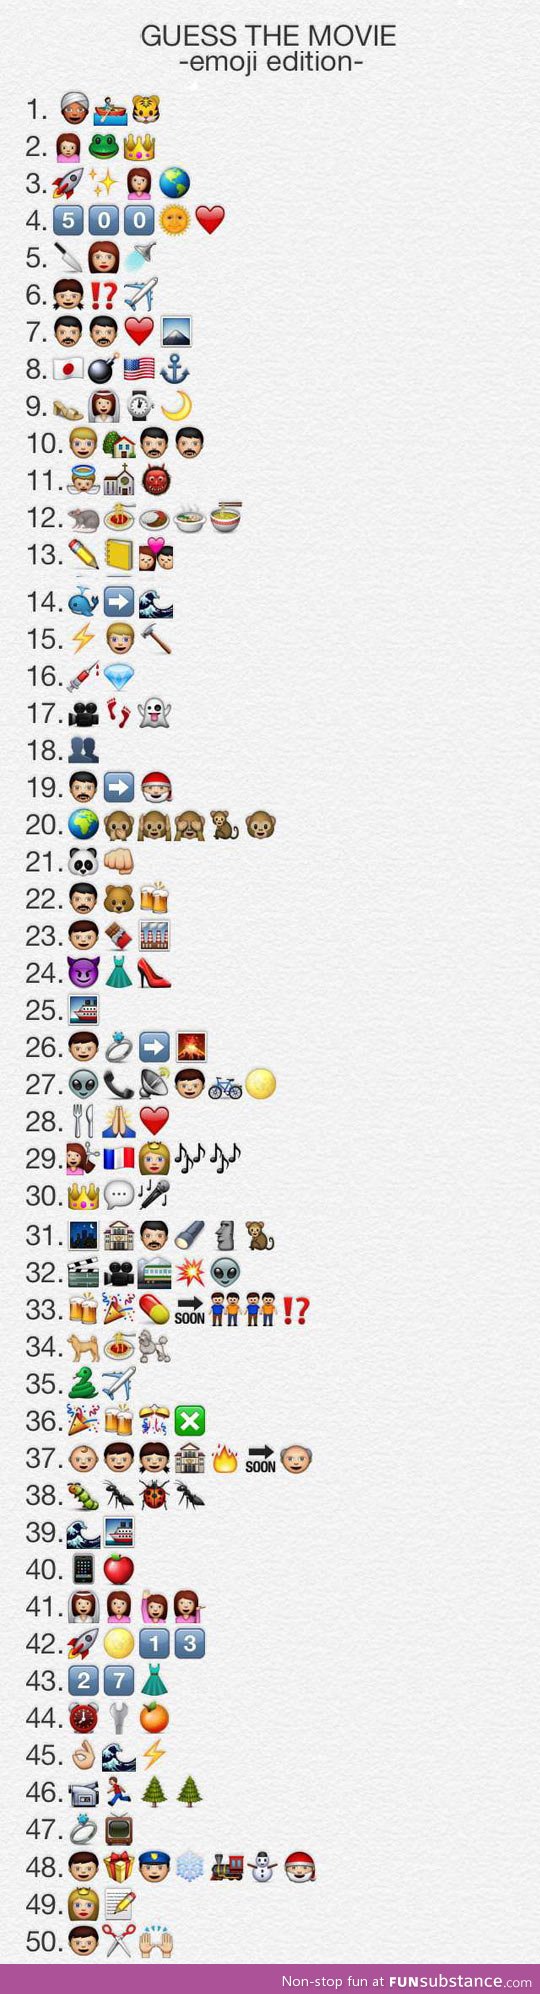 Guess the movie, emoji edition